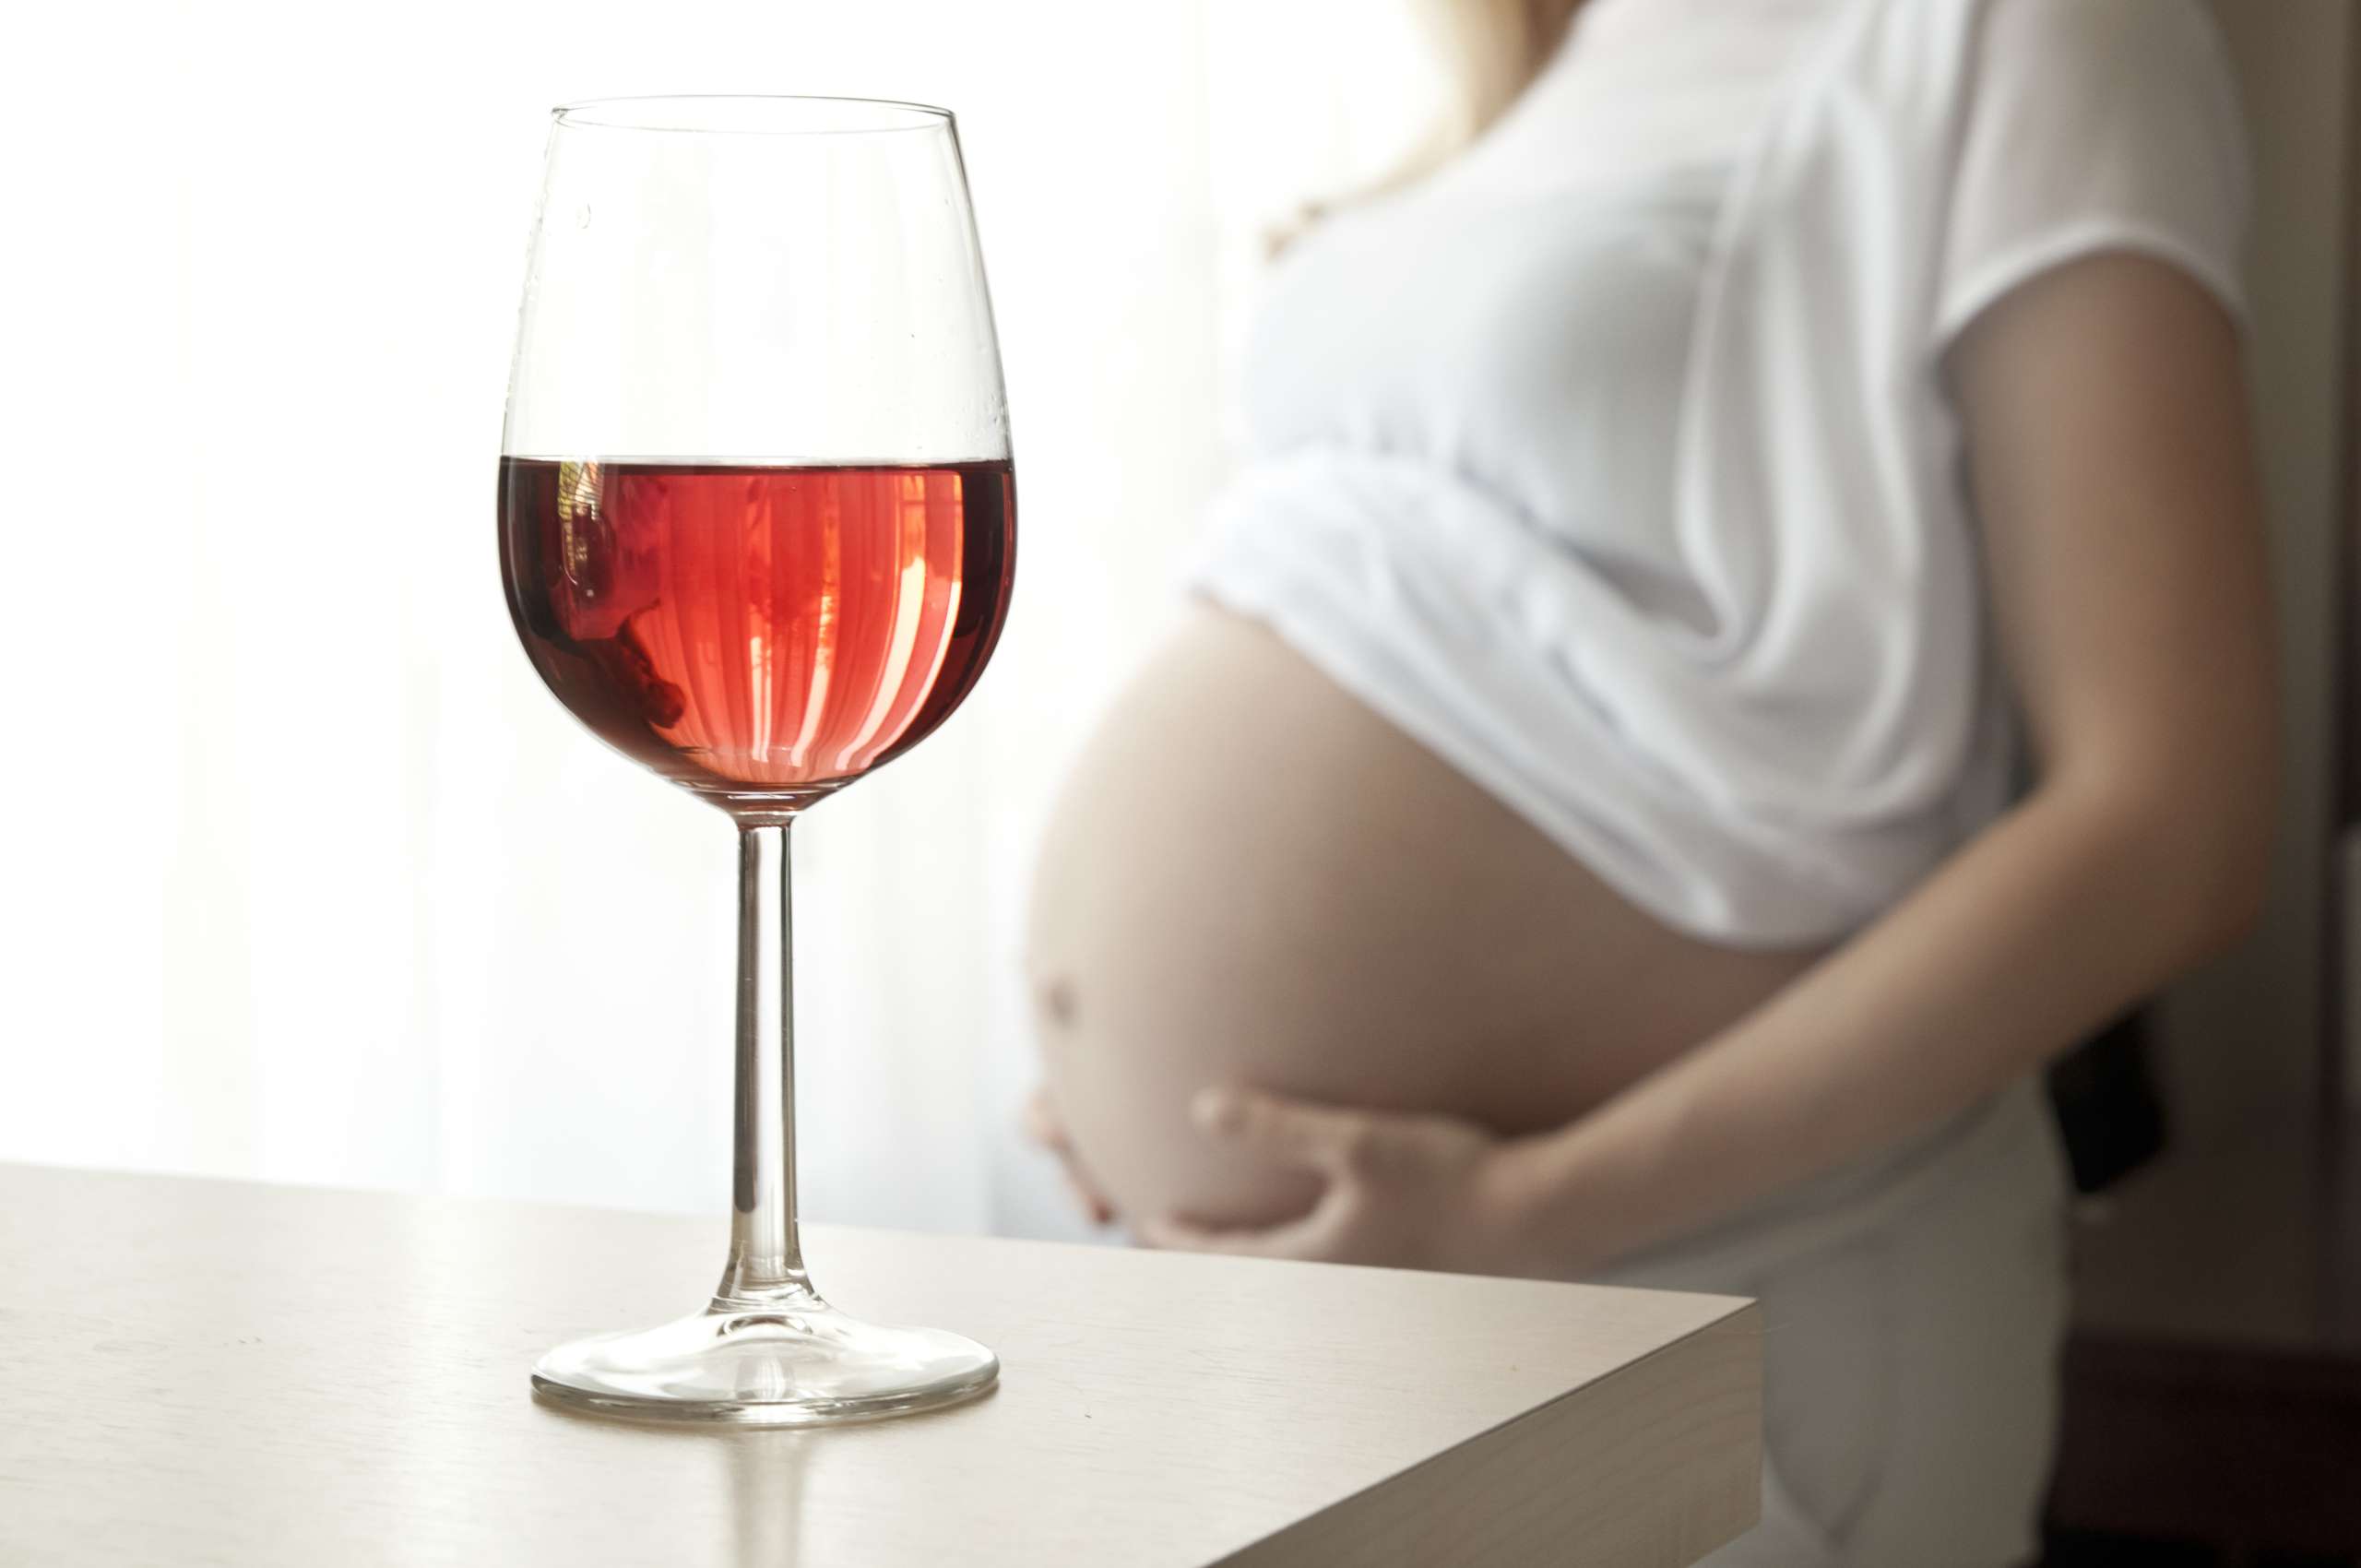 Pregnant woman and a glass of wine - drinking mother, social problems- Maternal Drug Use